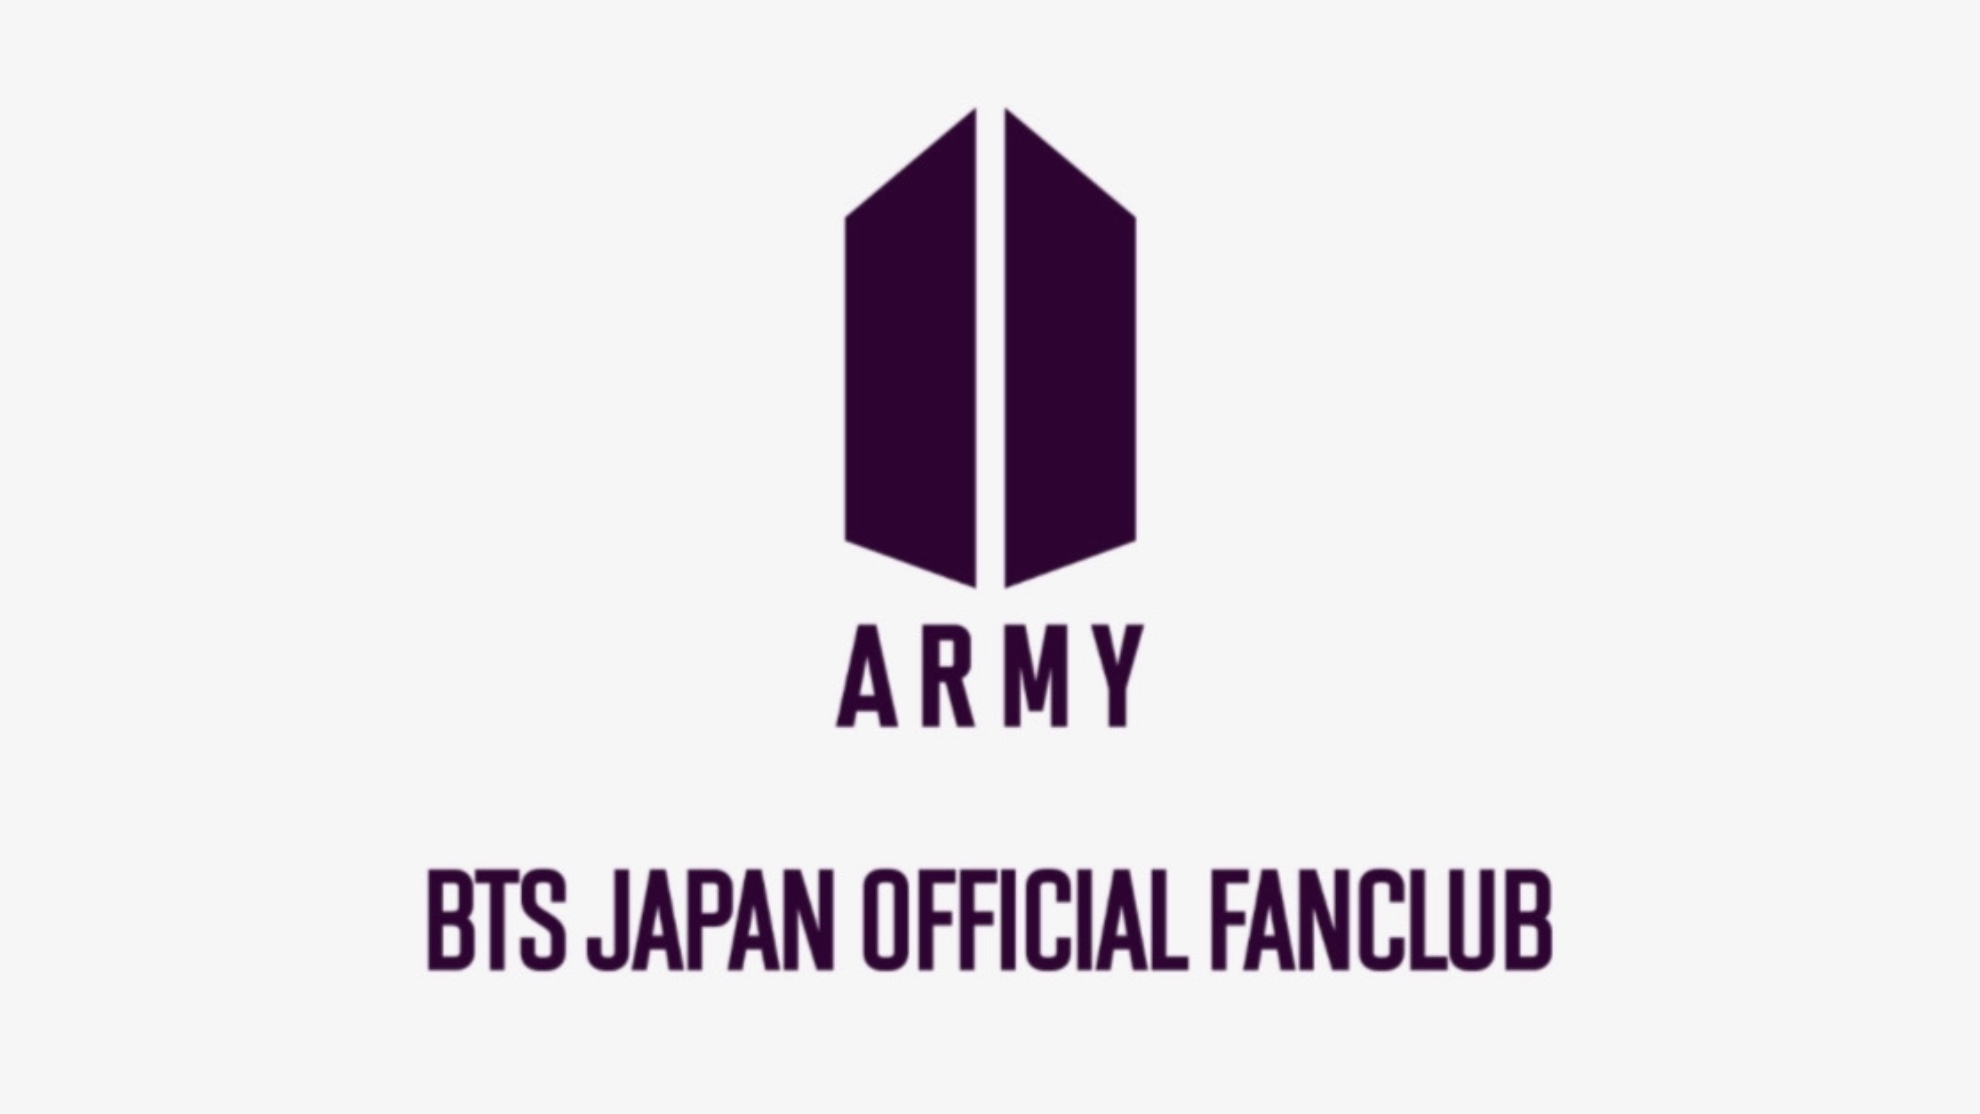 BTS JAPAN OFFICIAL FANCLUBやMerch Packについて詳しくまとめました 